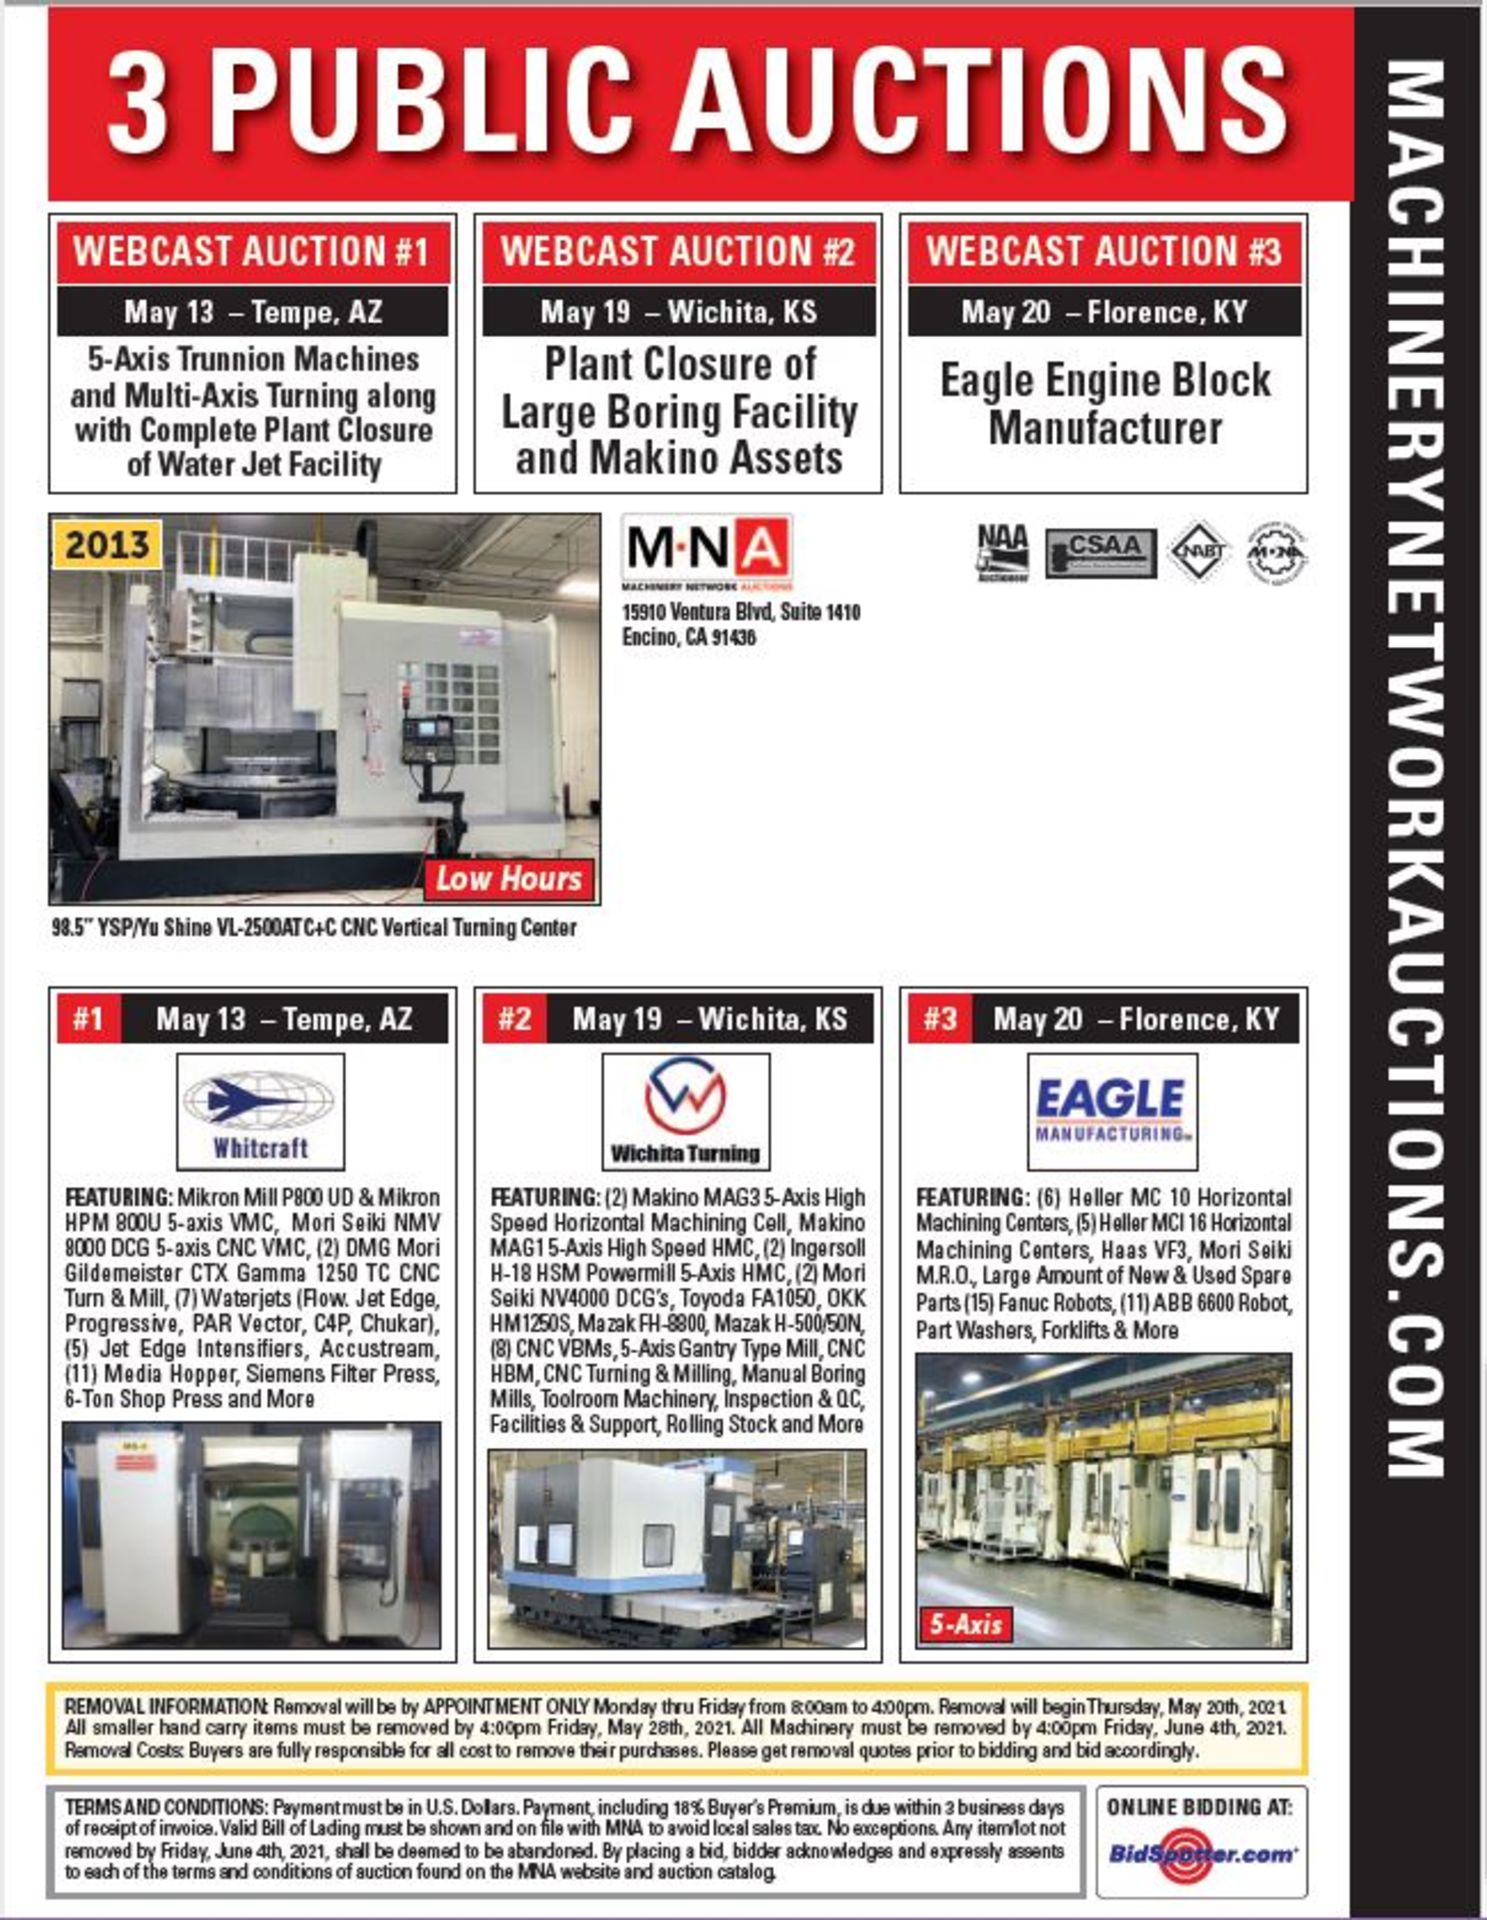 *Industrial Real Estate for Sale!* (2) Makino MAG 3 5-Axis High Speed HMC, Makino MAG 1 & More! - Image 8 of 8